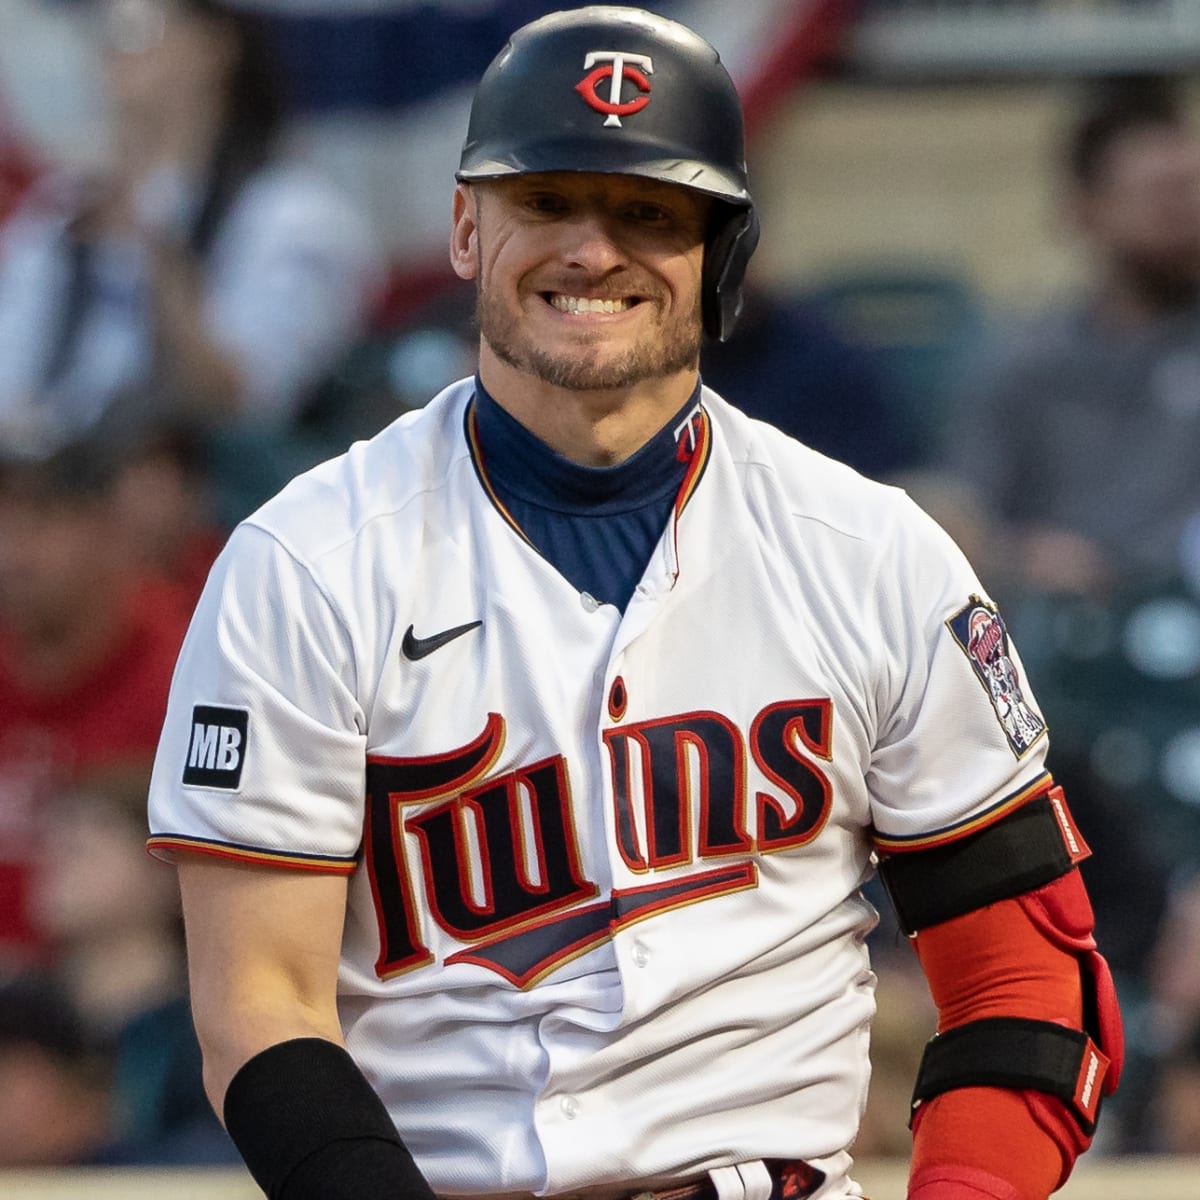 Yankees get Josh Donaldson from Twins in trade for Gary Sánchez, Gio Urshela